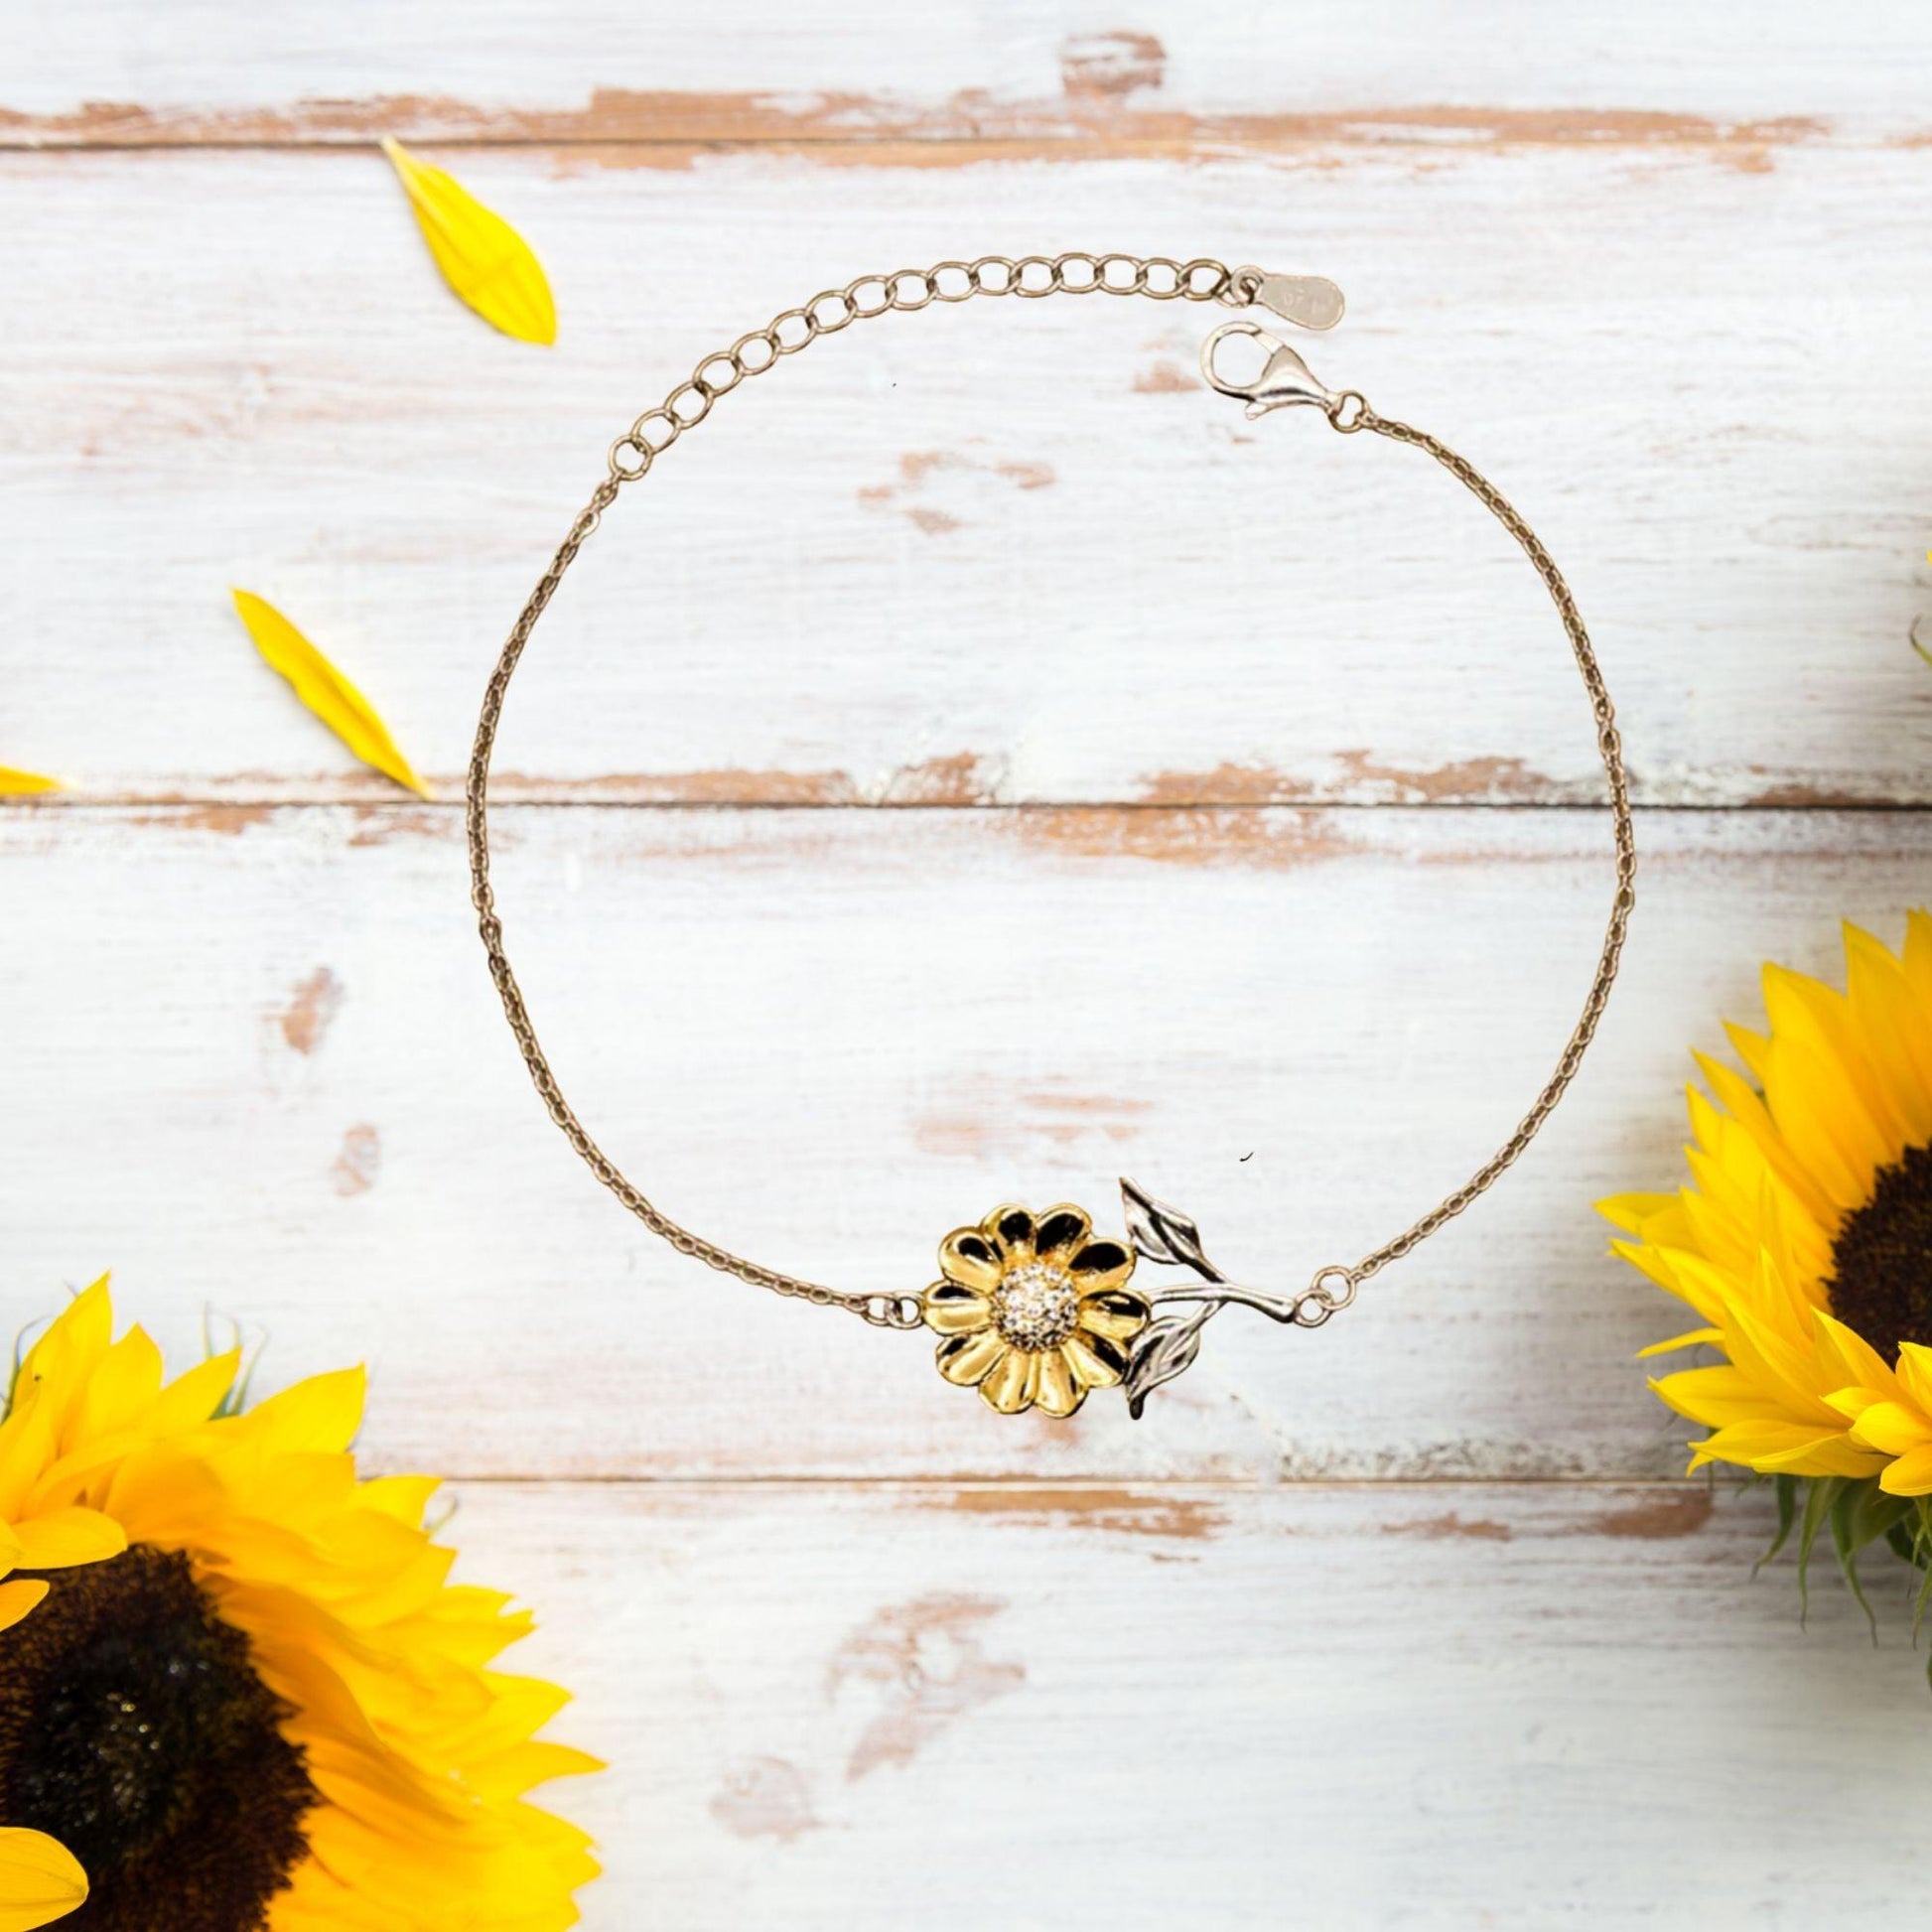 Motivational Godson Sunflower Bracelet - I can promise to love you for the rest of my life, Birthday, Christmas Holiday Jewelry Gift - Mallard Moon Gift Shop